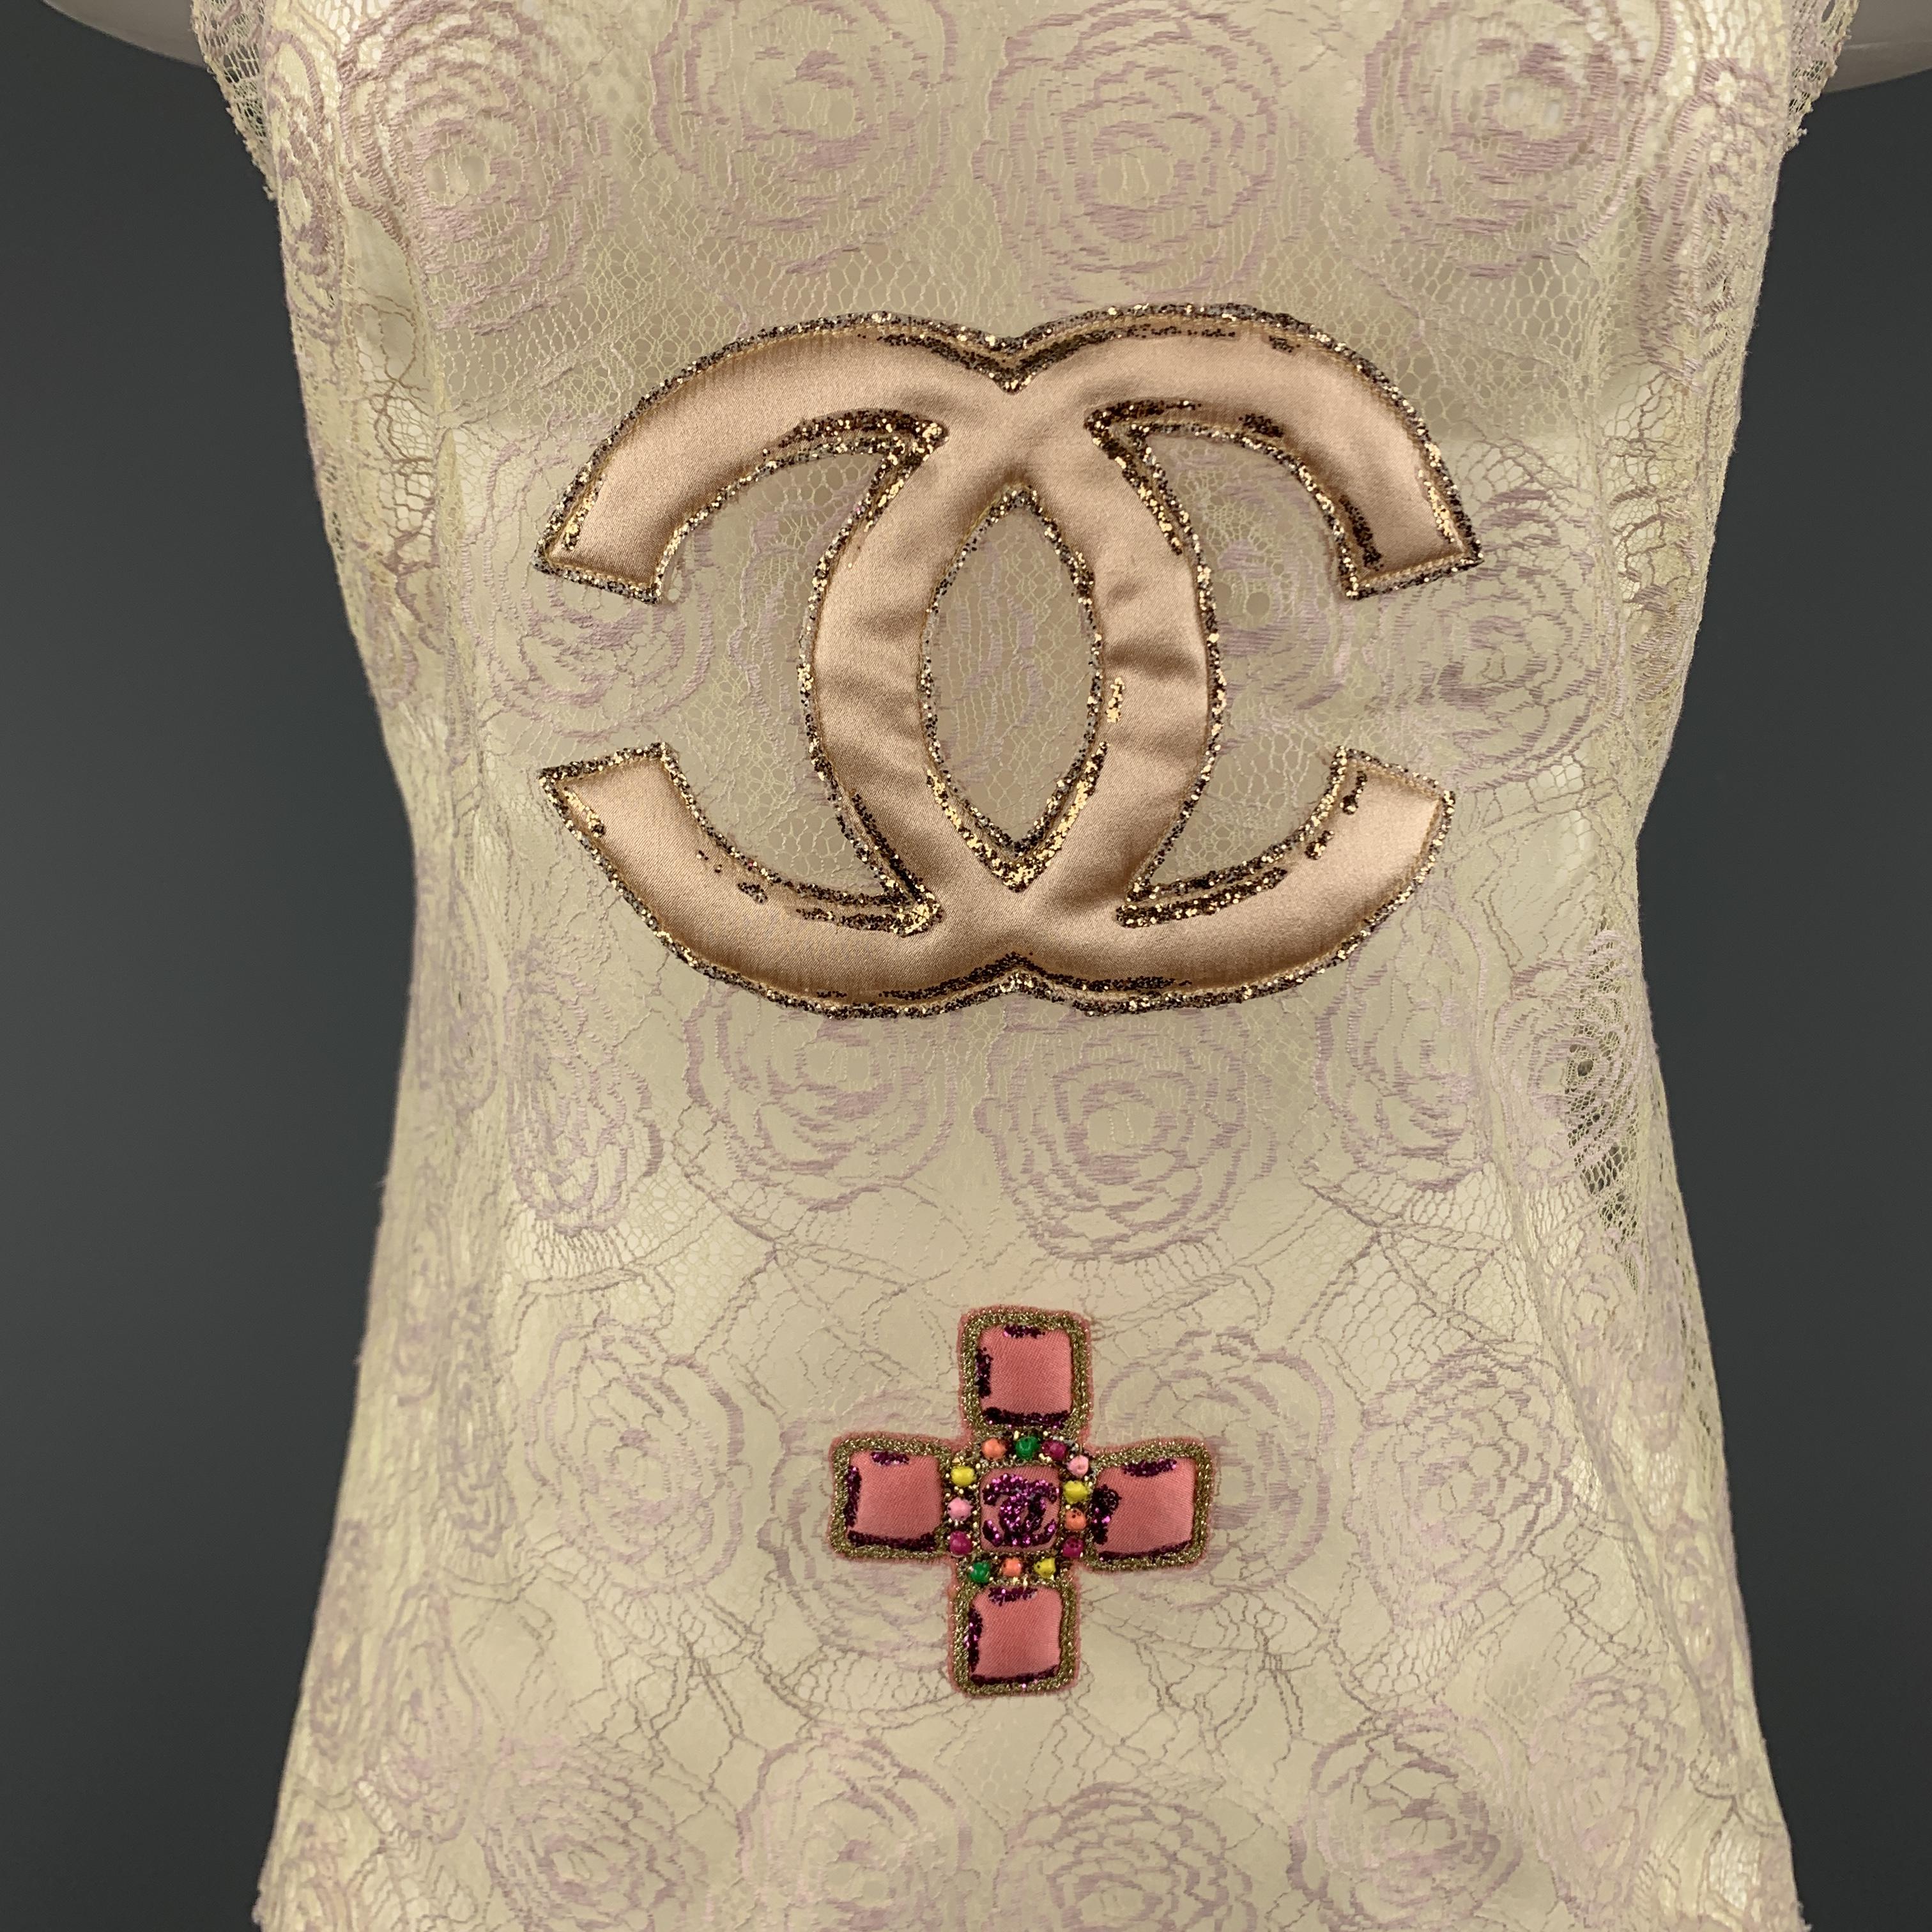 Archive CHANEL Cruise 2004 Collection sleeveless top comes in beige and pink floral camellia lace with a scoop neck champagne satin CC logo and pink jewelry patches, detailed with glitter accents. Made in Italy.

Excellent Pre-Owned